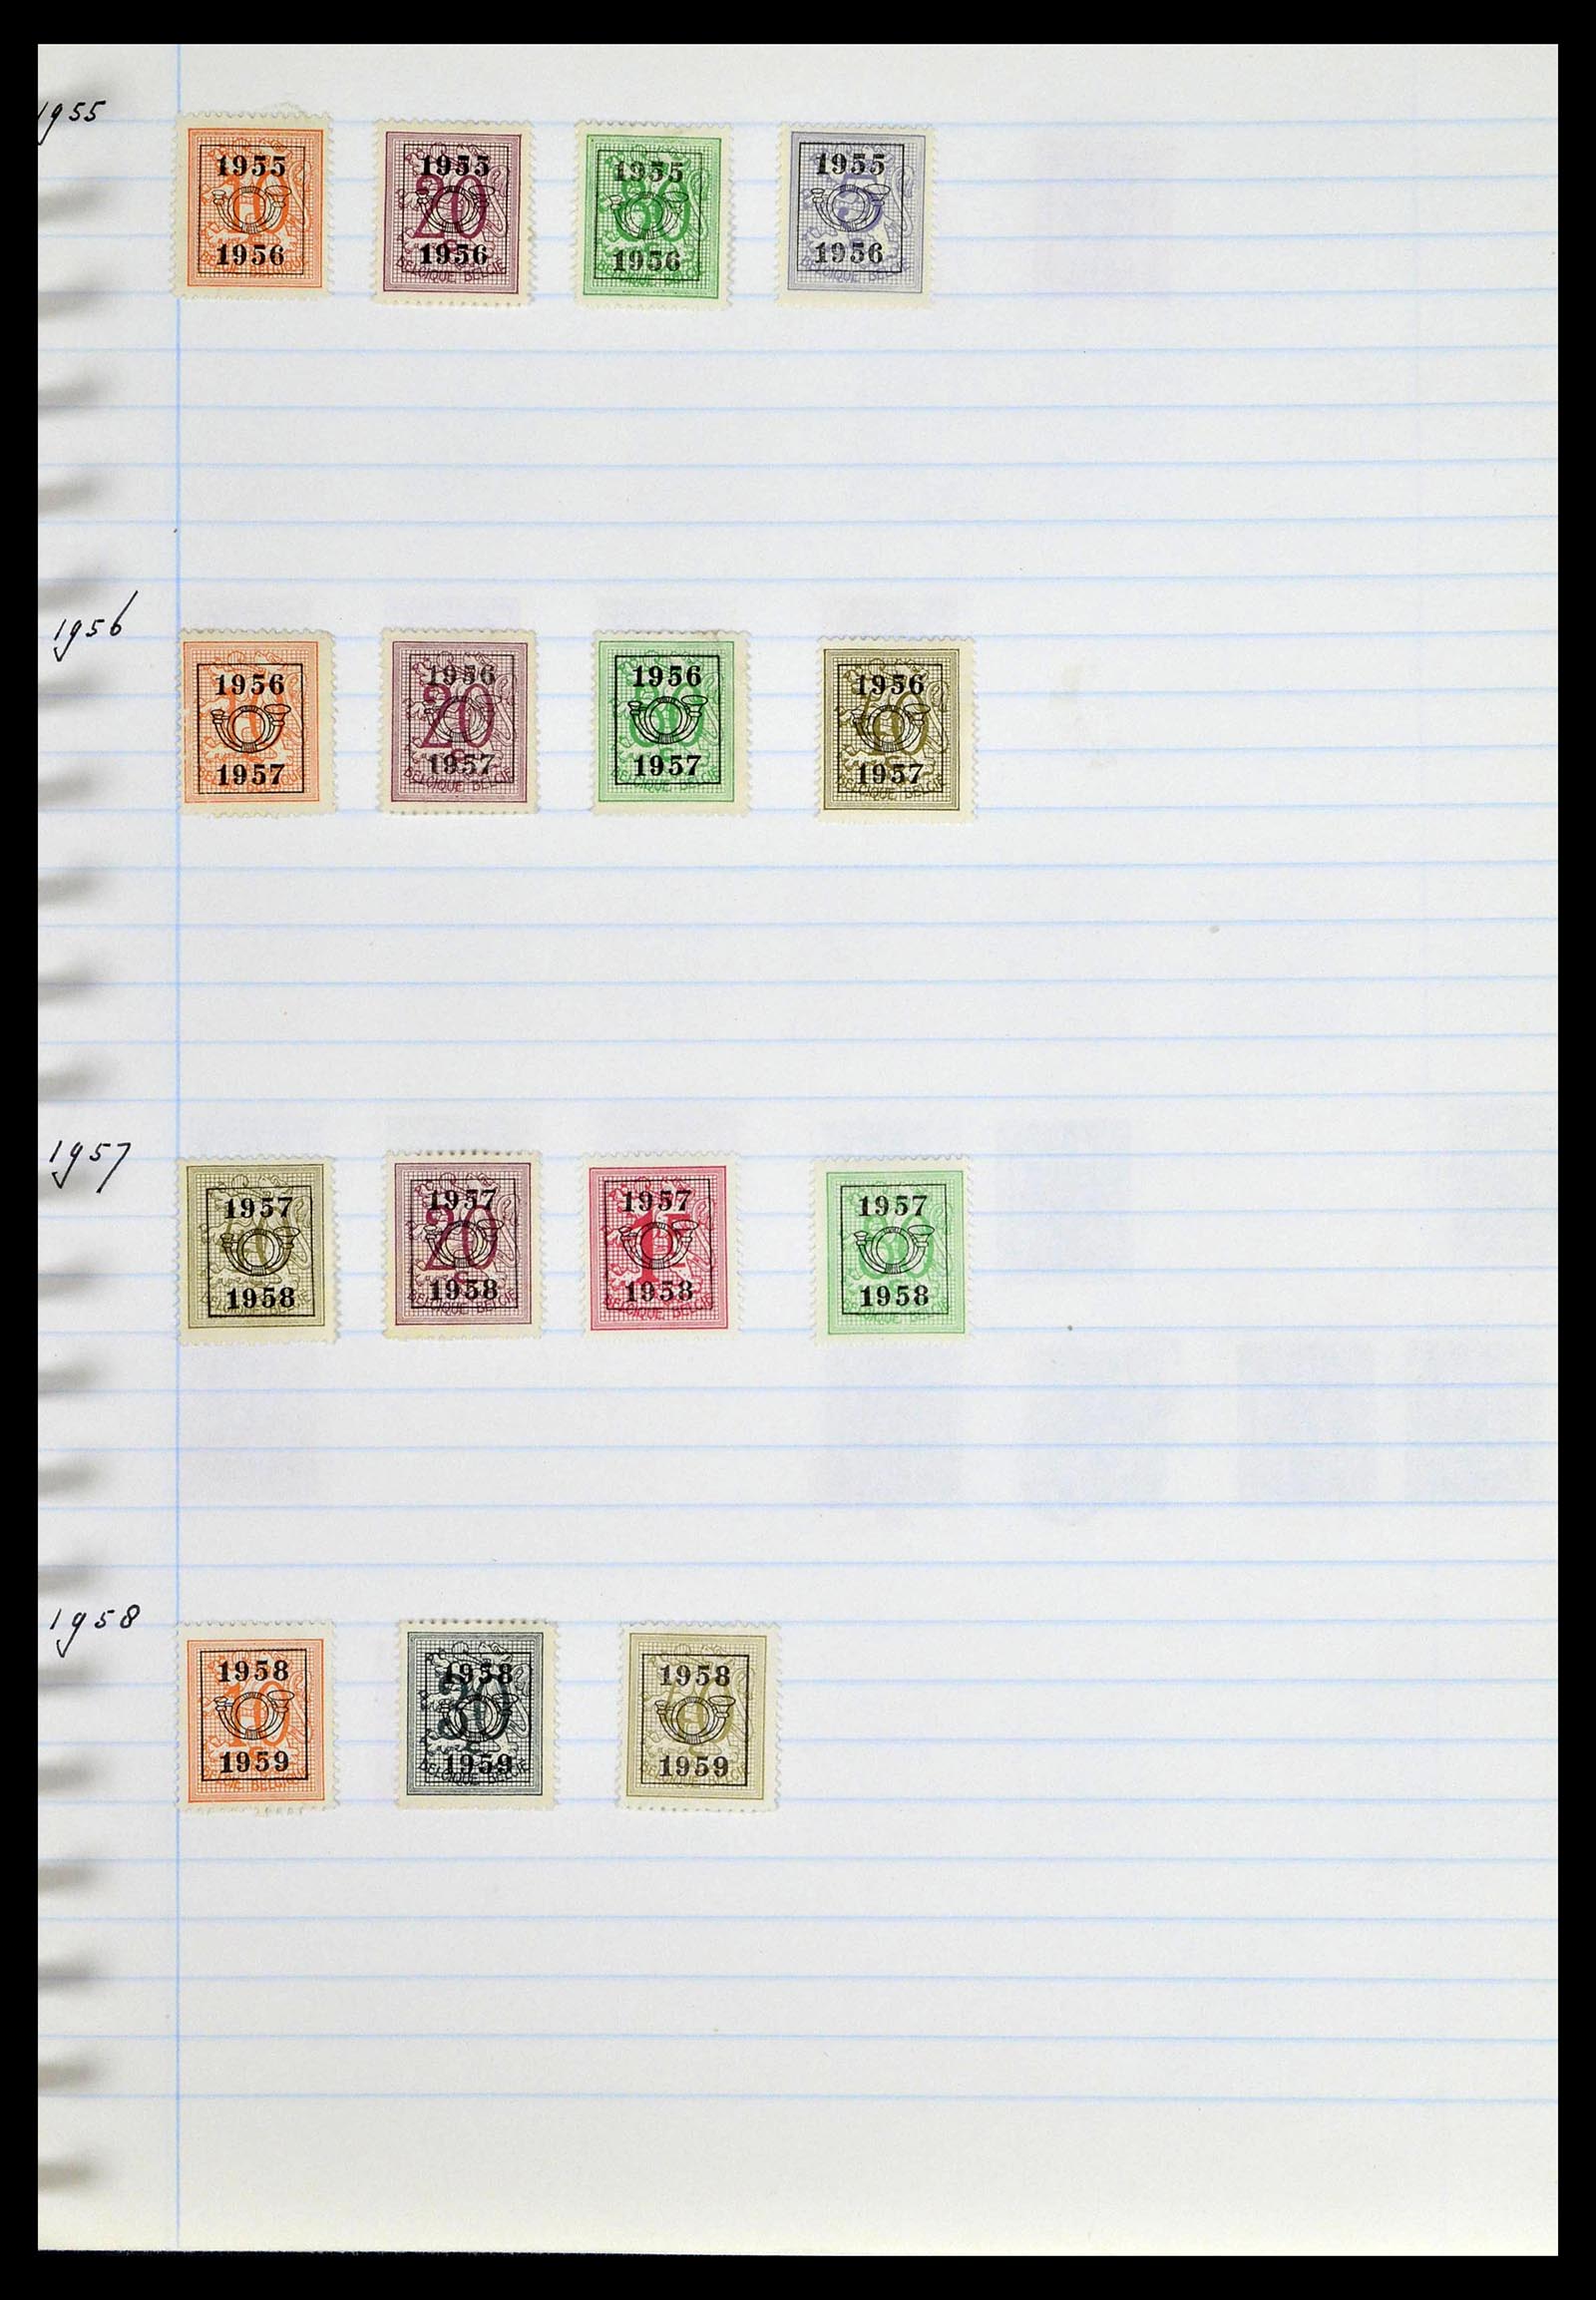 38729 0089 - Stamp collection 38729 Belgium cancels 1849-1950.